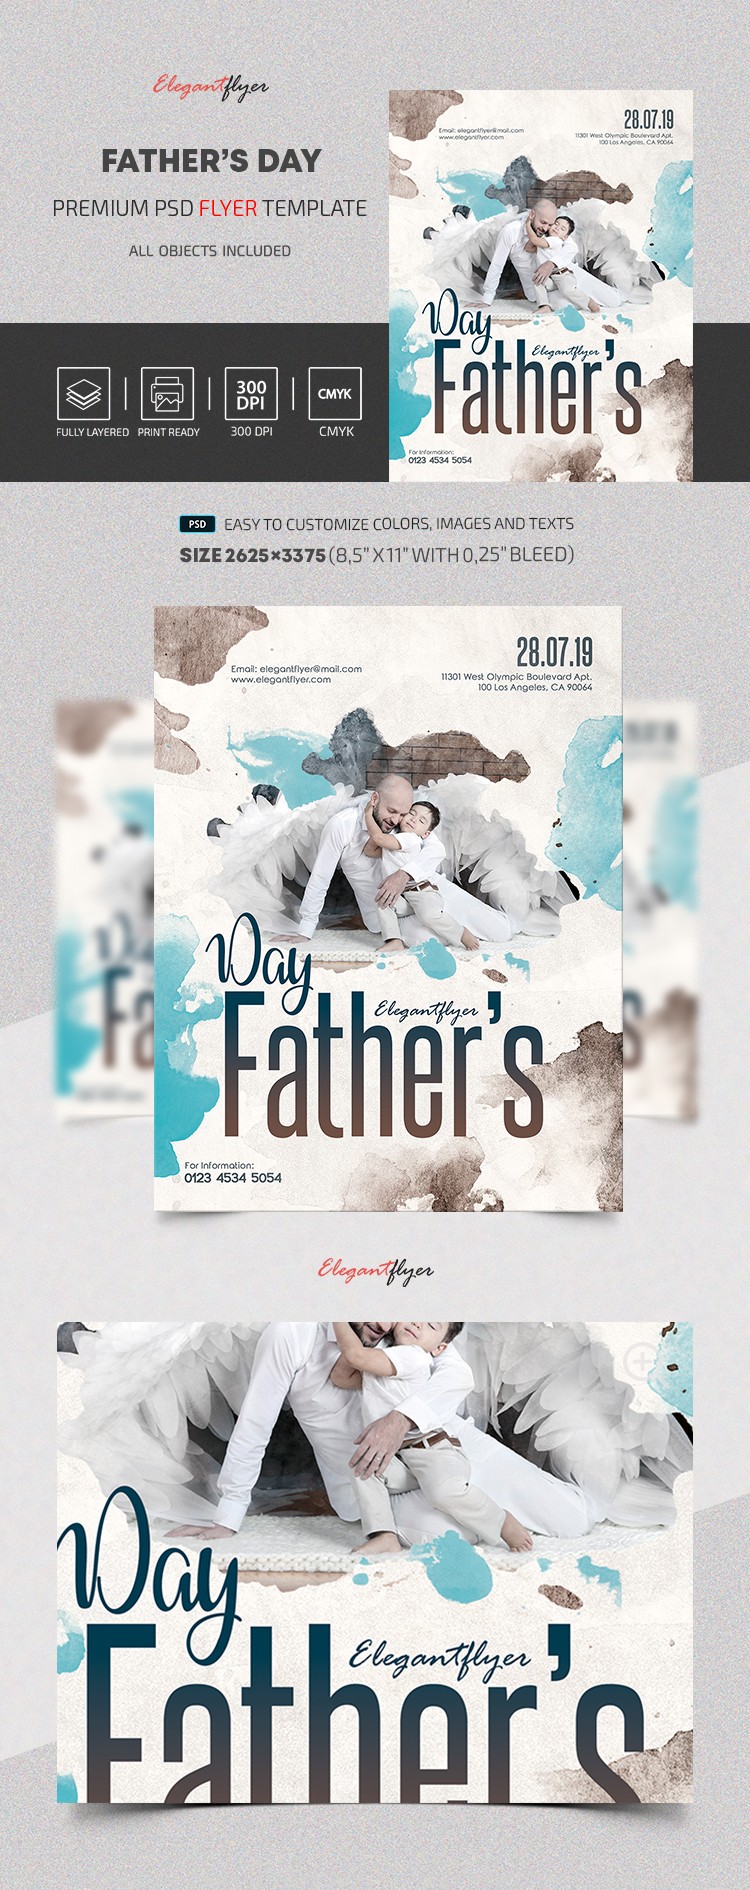 Father’s Day – 3rd Sunday of June by ElegantFlyer